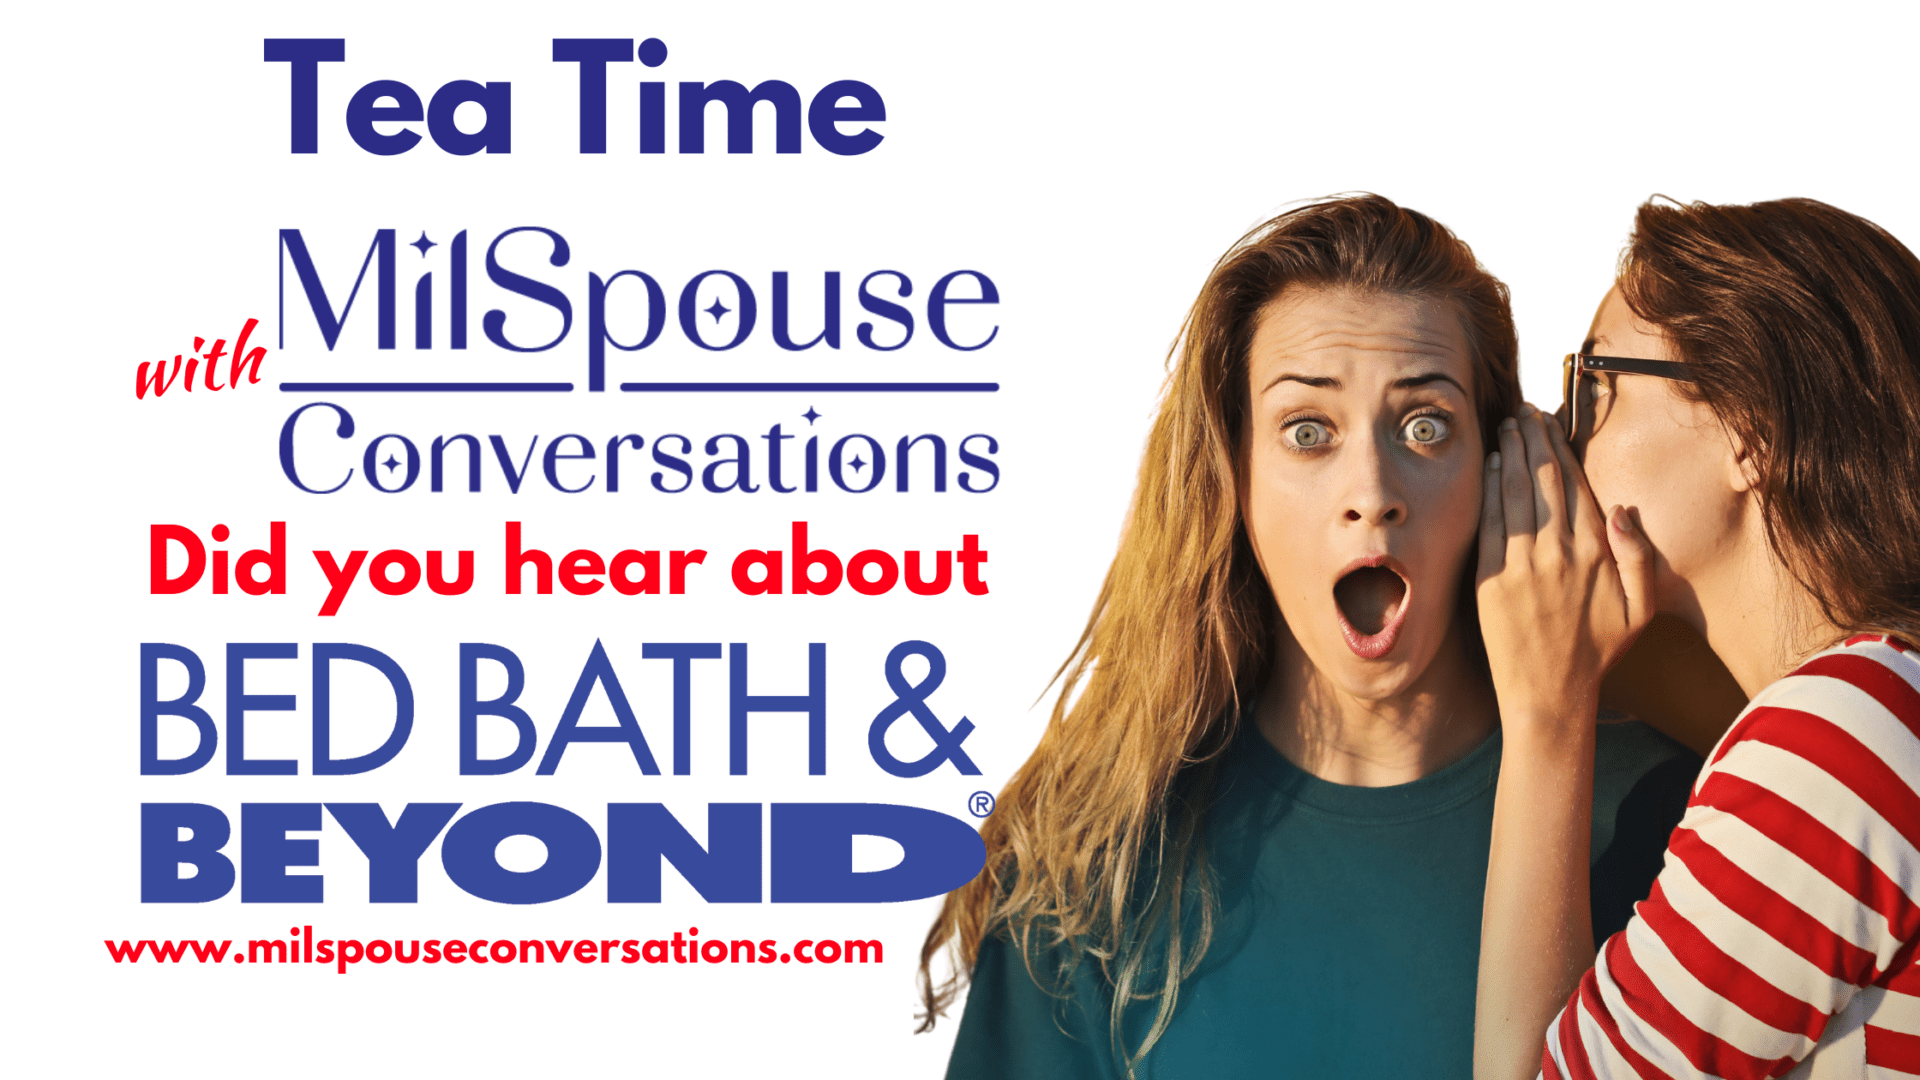 A woman talking on the phone with text that reads " a time for all spouse conversations. You hear about bath & beyond ".